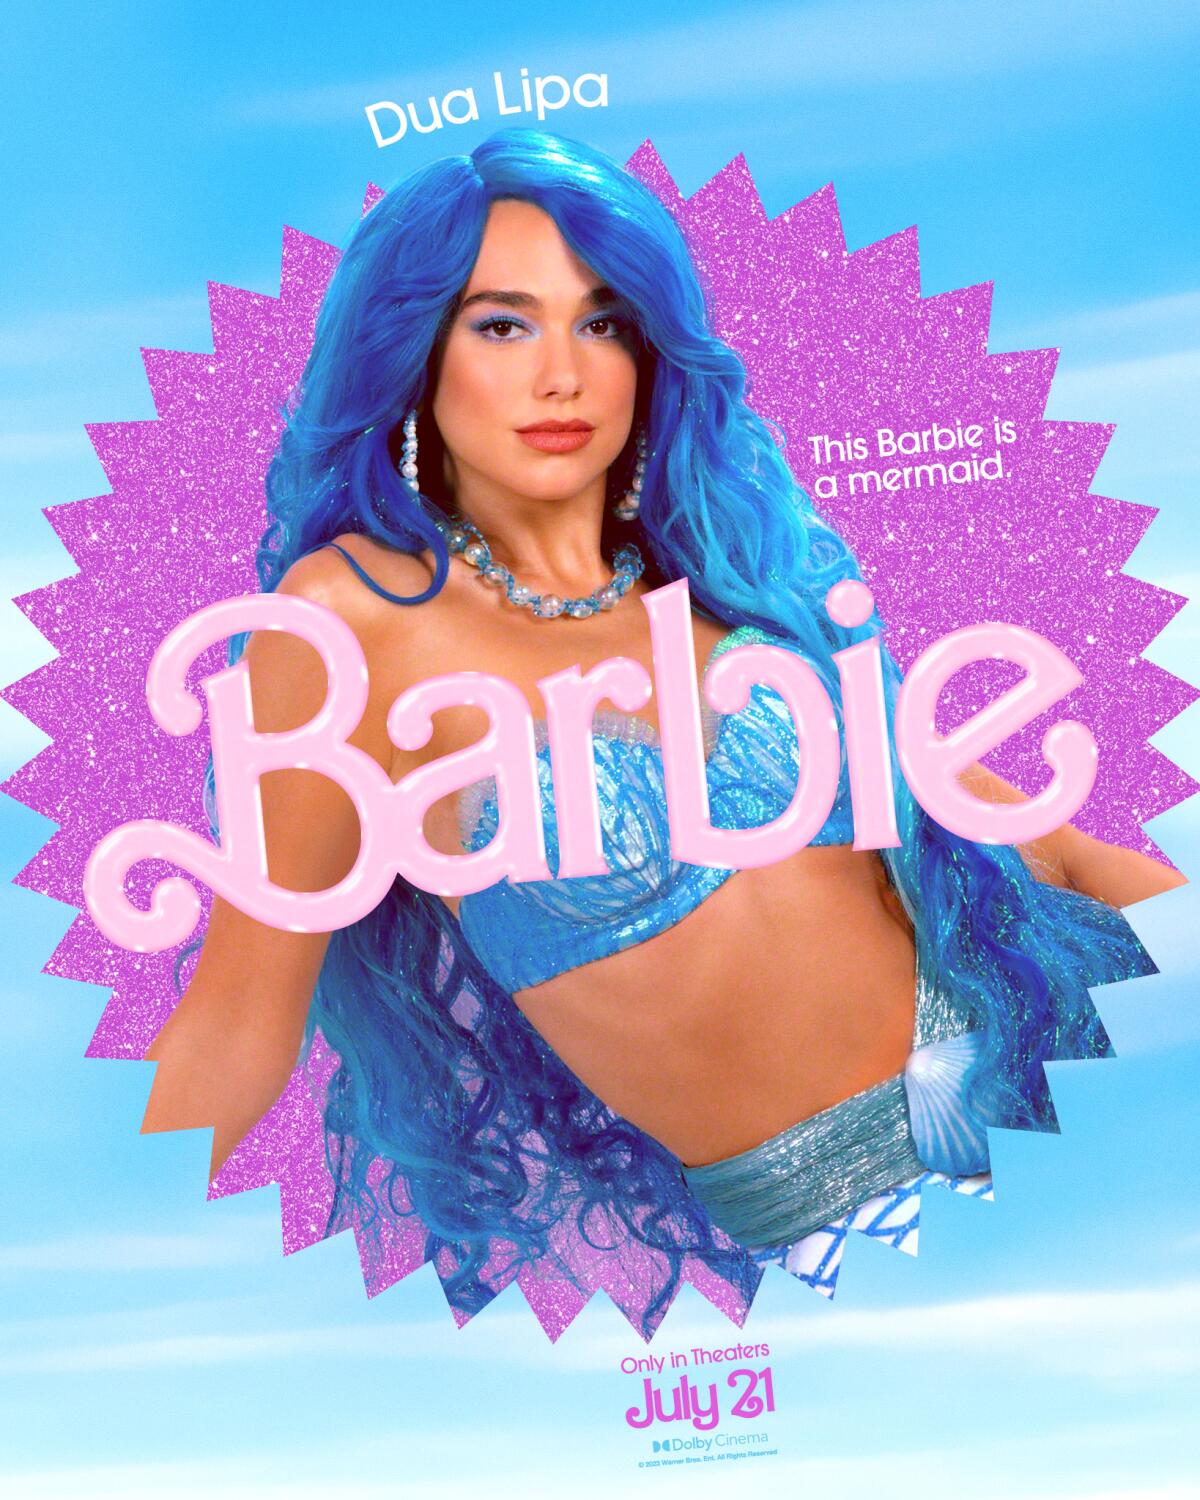 Dua Lipa lounges in a "Barbie" movie poster. She wears a long, blue wig and a blue mermaid costume.